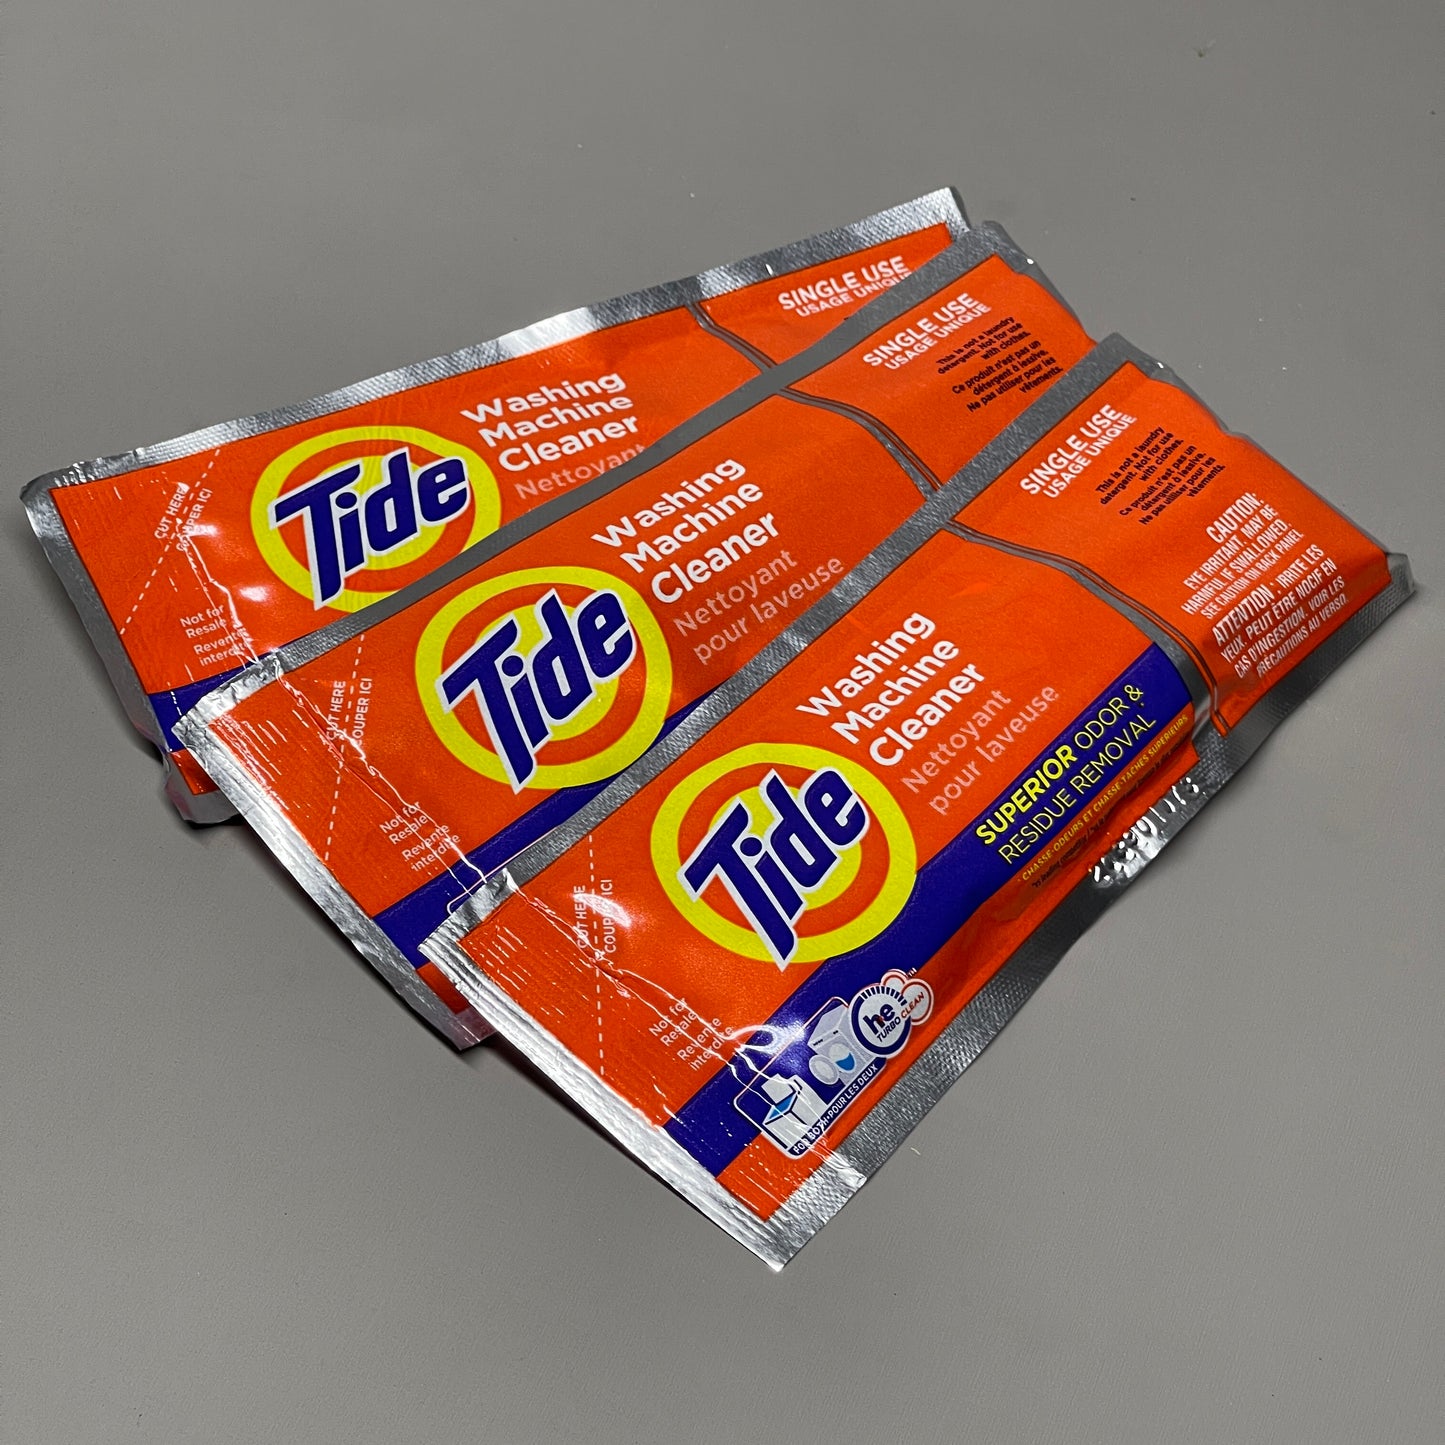 TIDE Washing Machine Cleaner Tablets 3-Pouches (2.6 oz each) Odor & Residue Removal